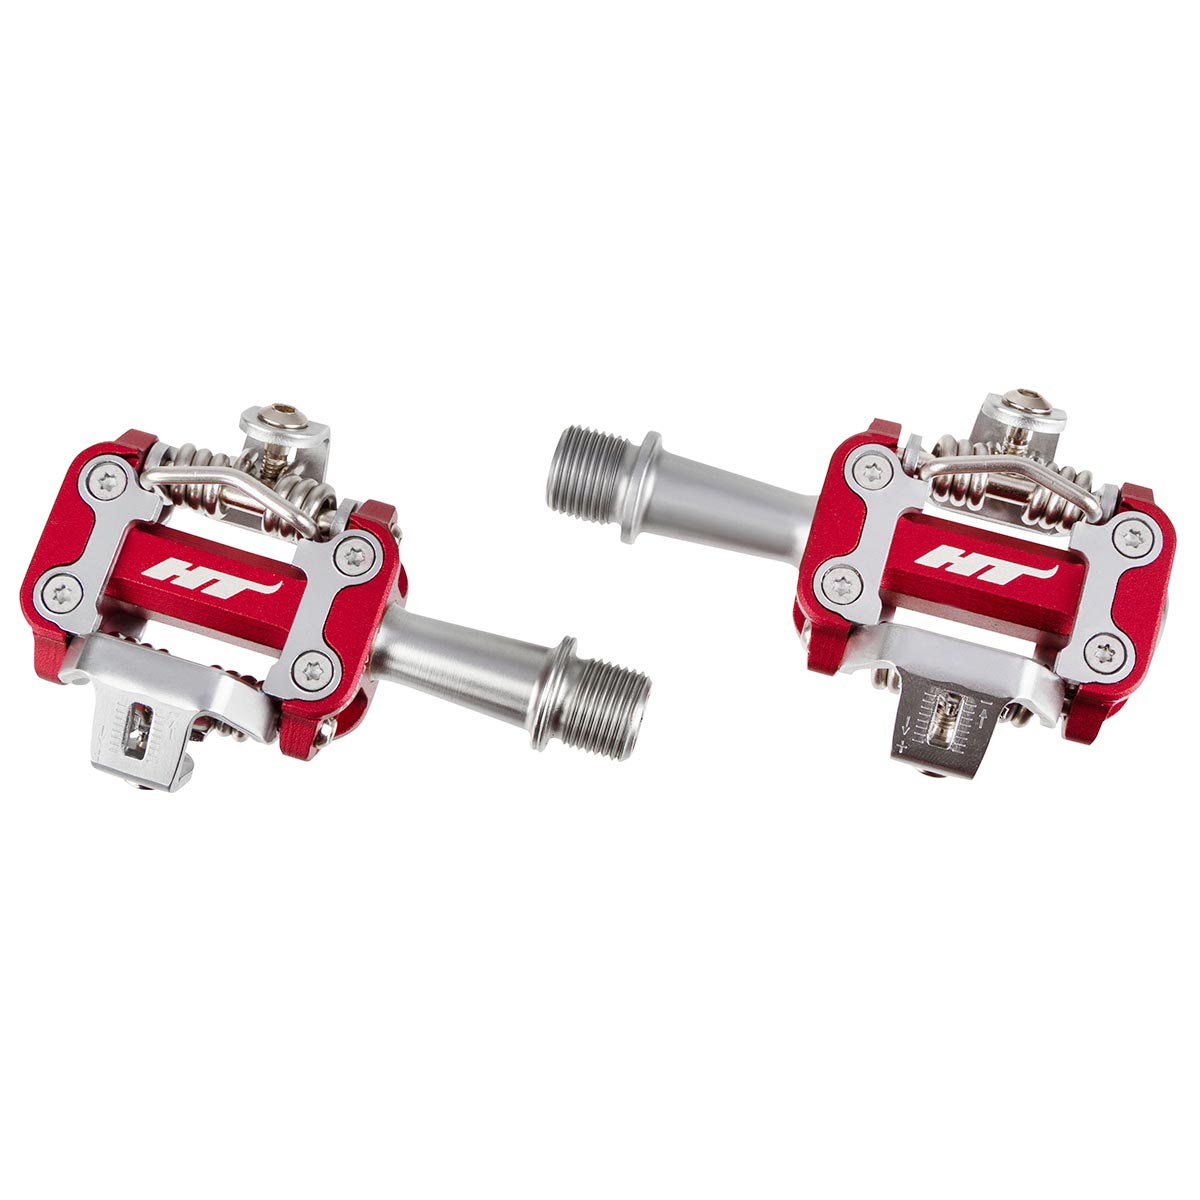 HT Components Pedals M1 XC Red